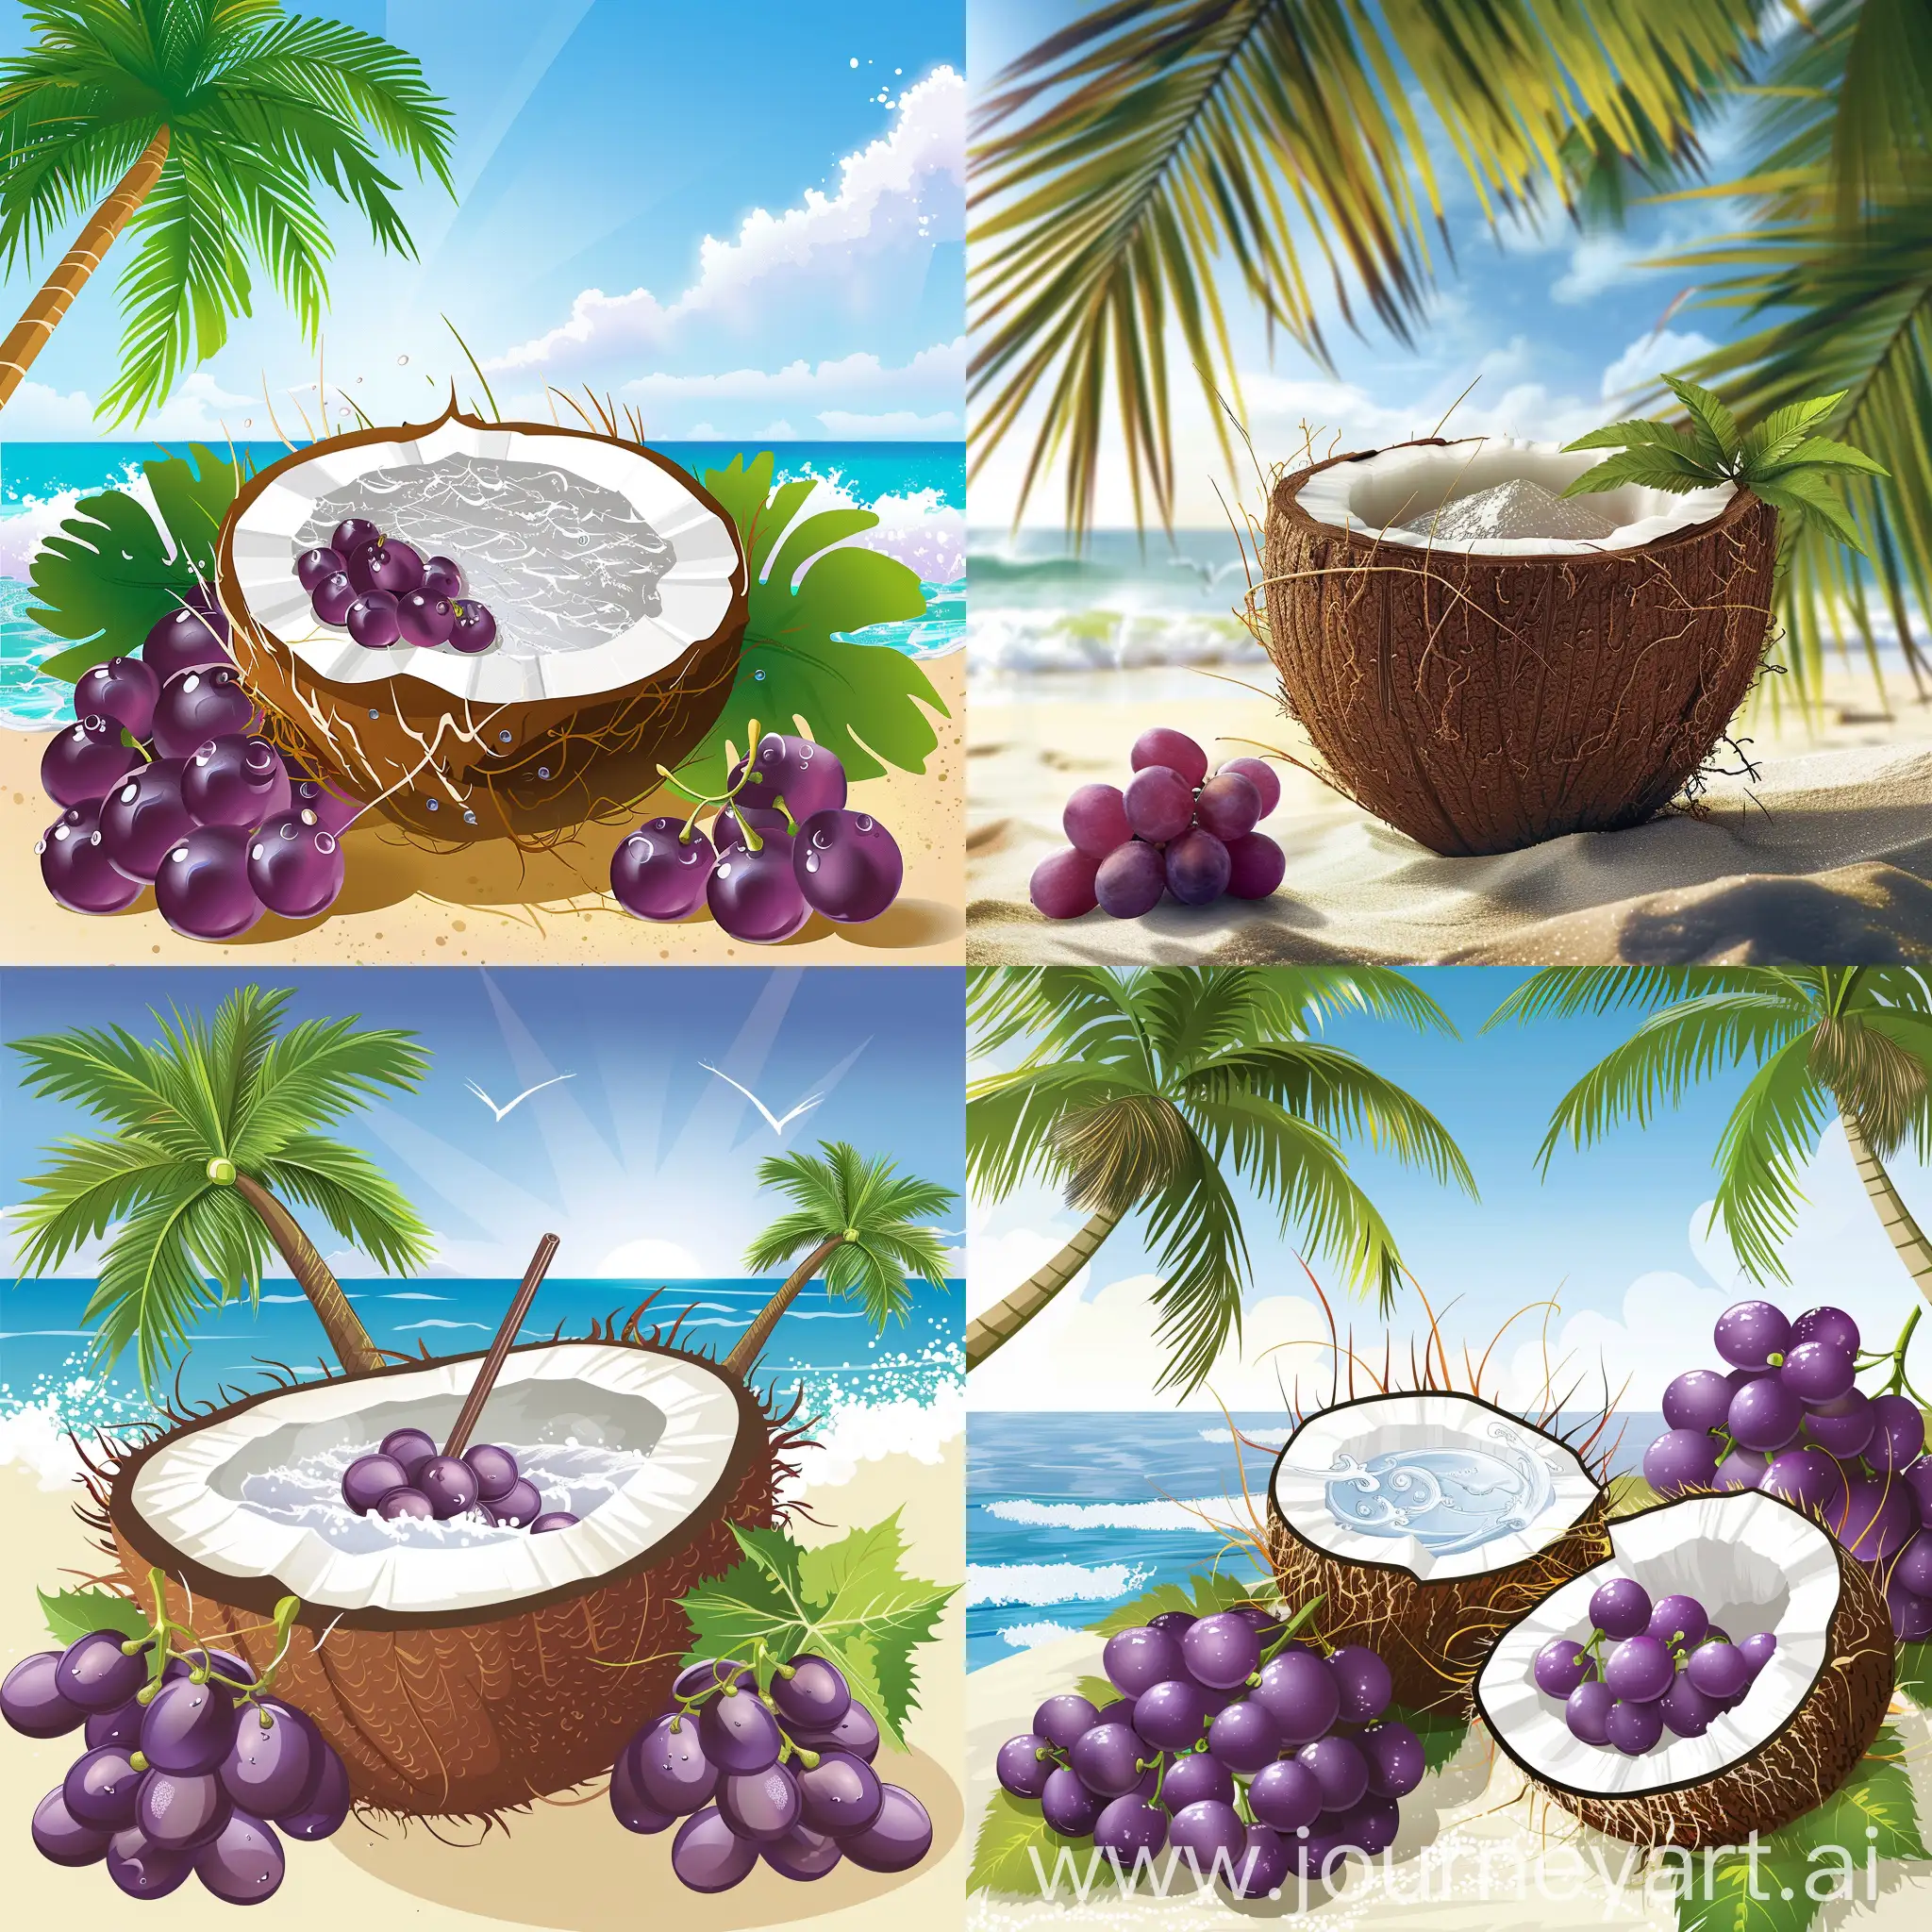 Refreshing-Coconut-Drink-with-Grapes-on-a-Sunny-Beach-Day